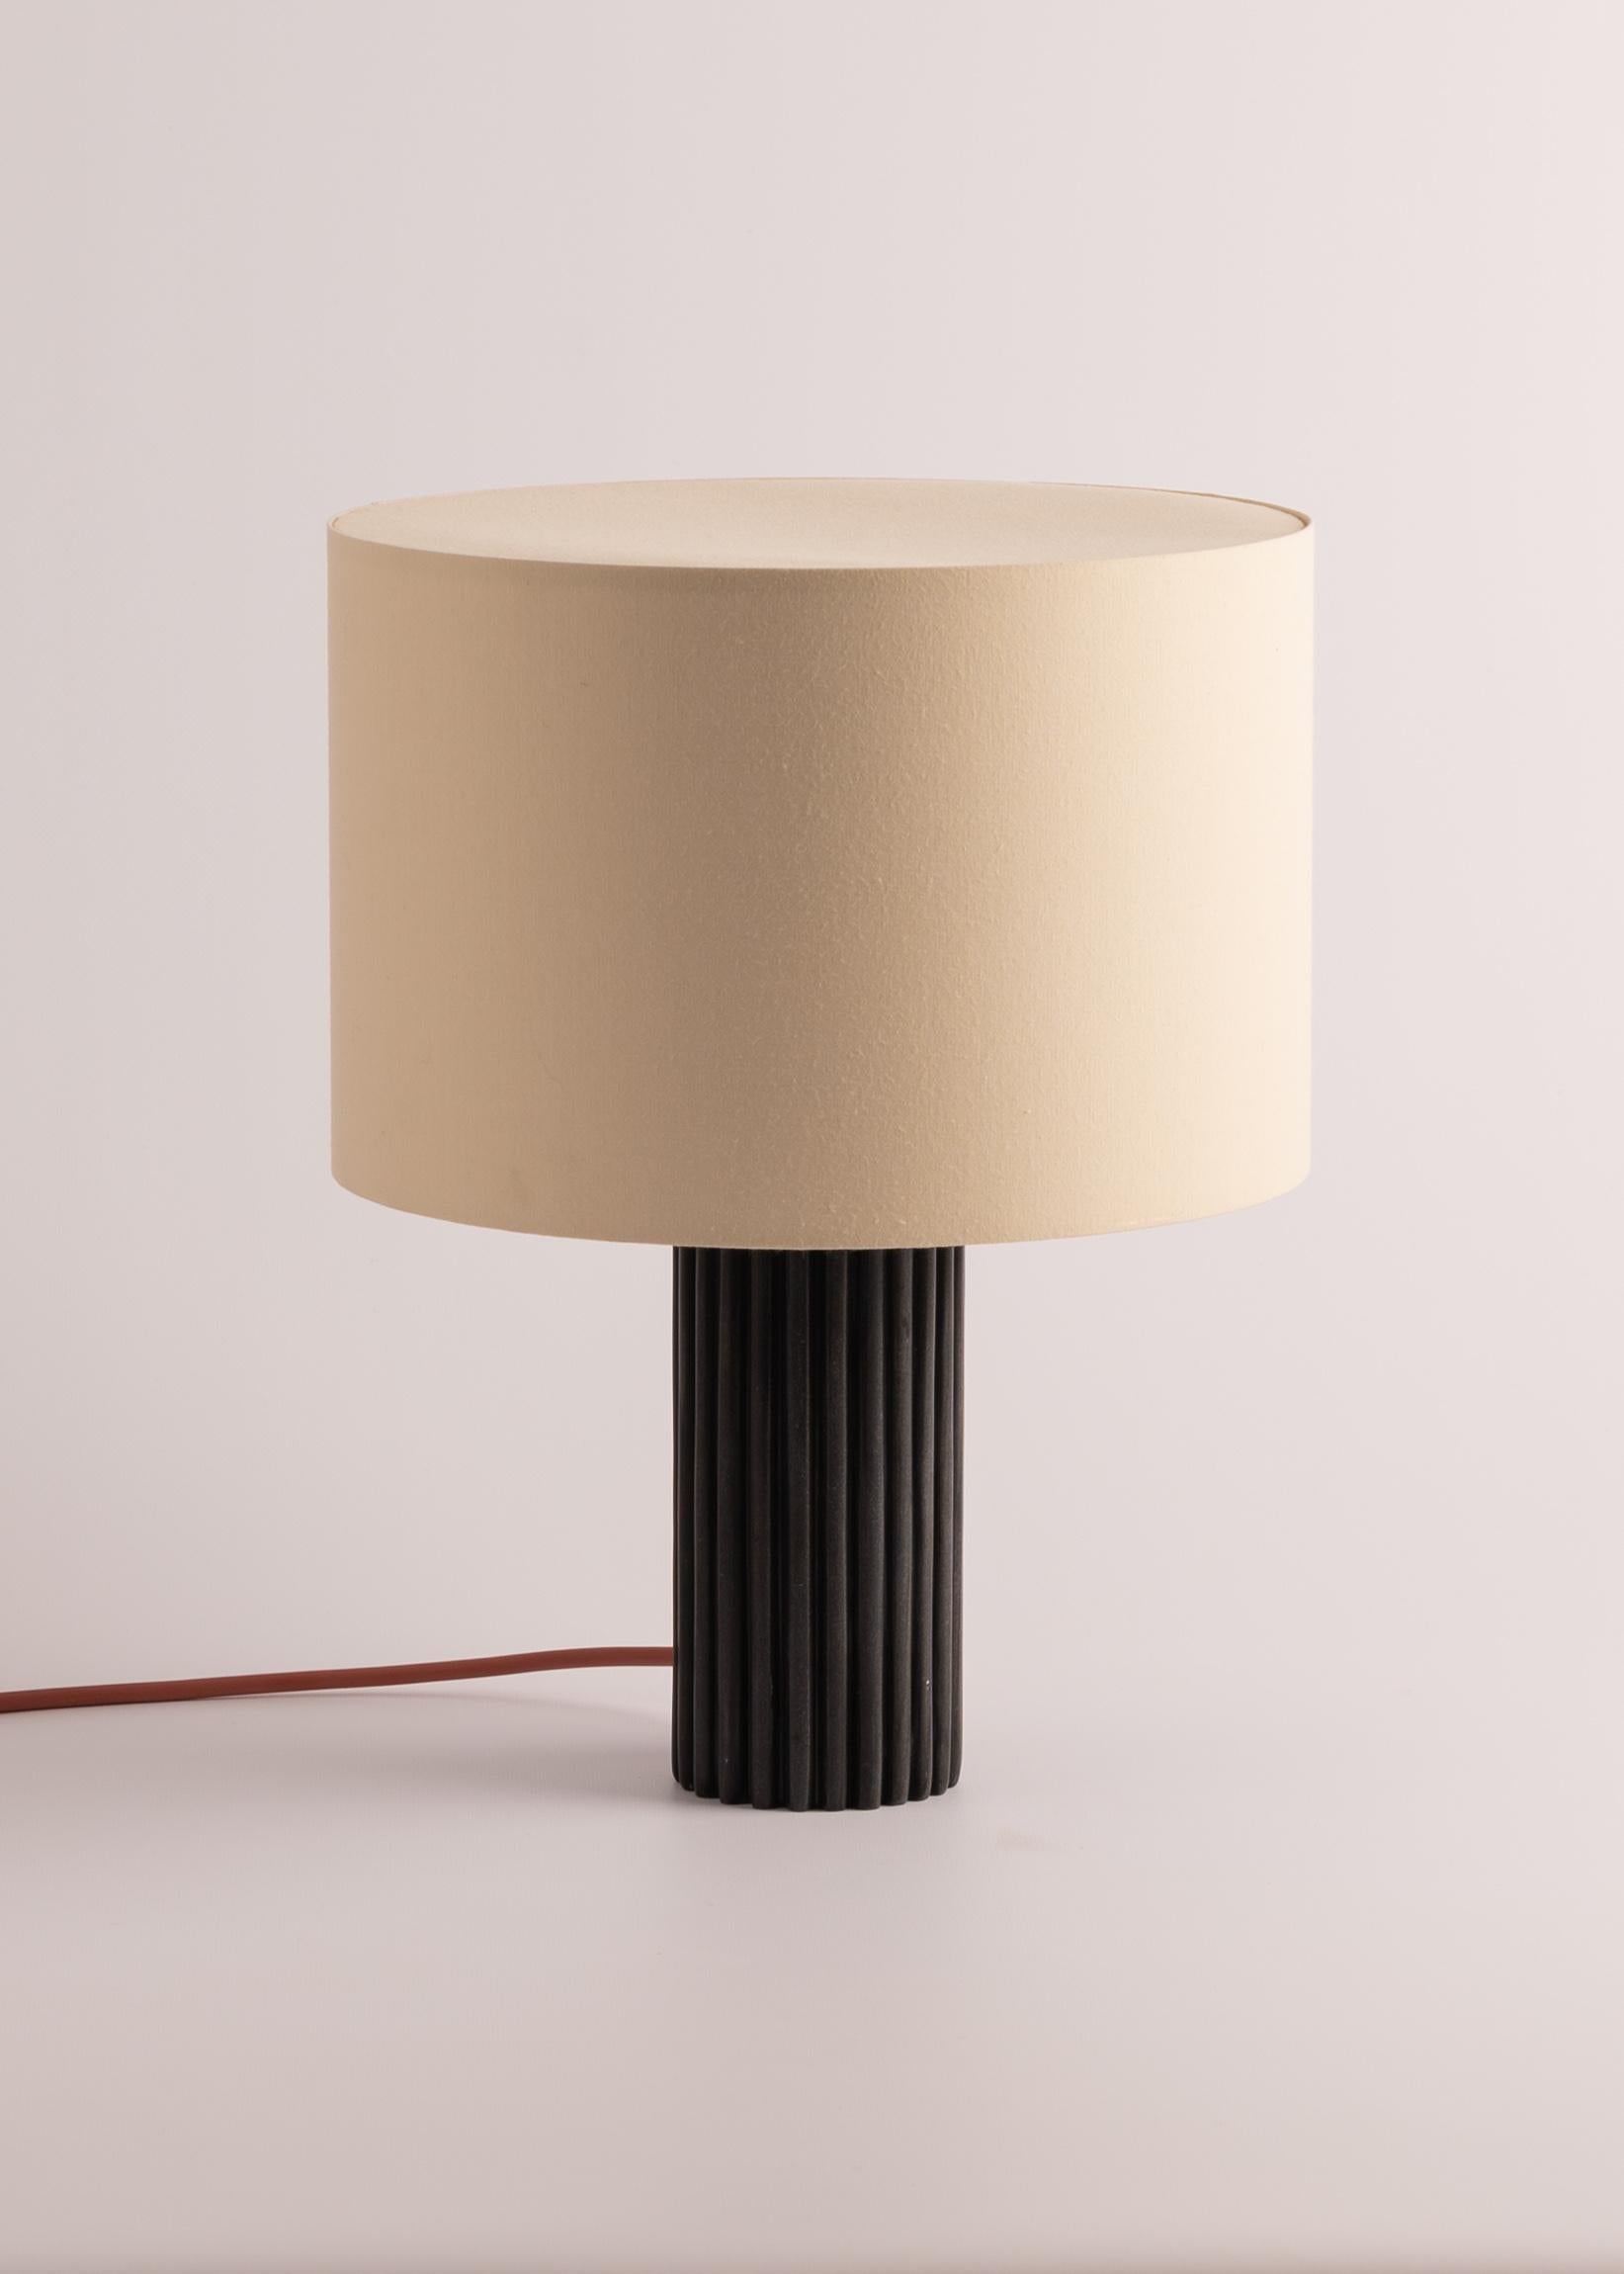 Black Marble Flutita Table Lamp by Simone & Marcel
Dimensions: Ø 30 x H 40 cm.
Materials: Cotton and black marble.

Also available in different marble and wood options and finishes. Custom options available on request. Please contact us. 

All our